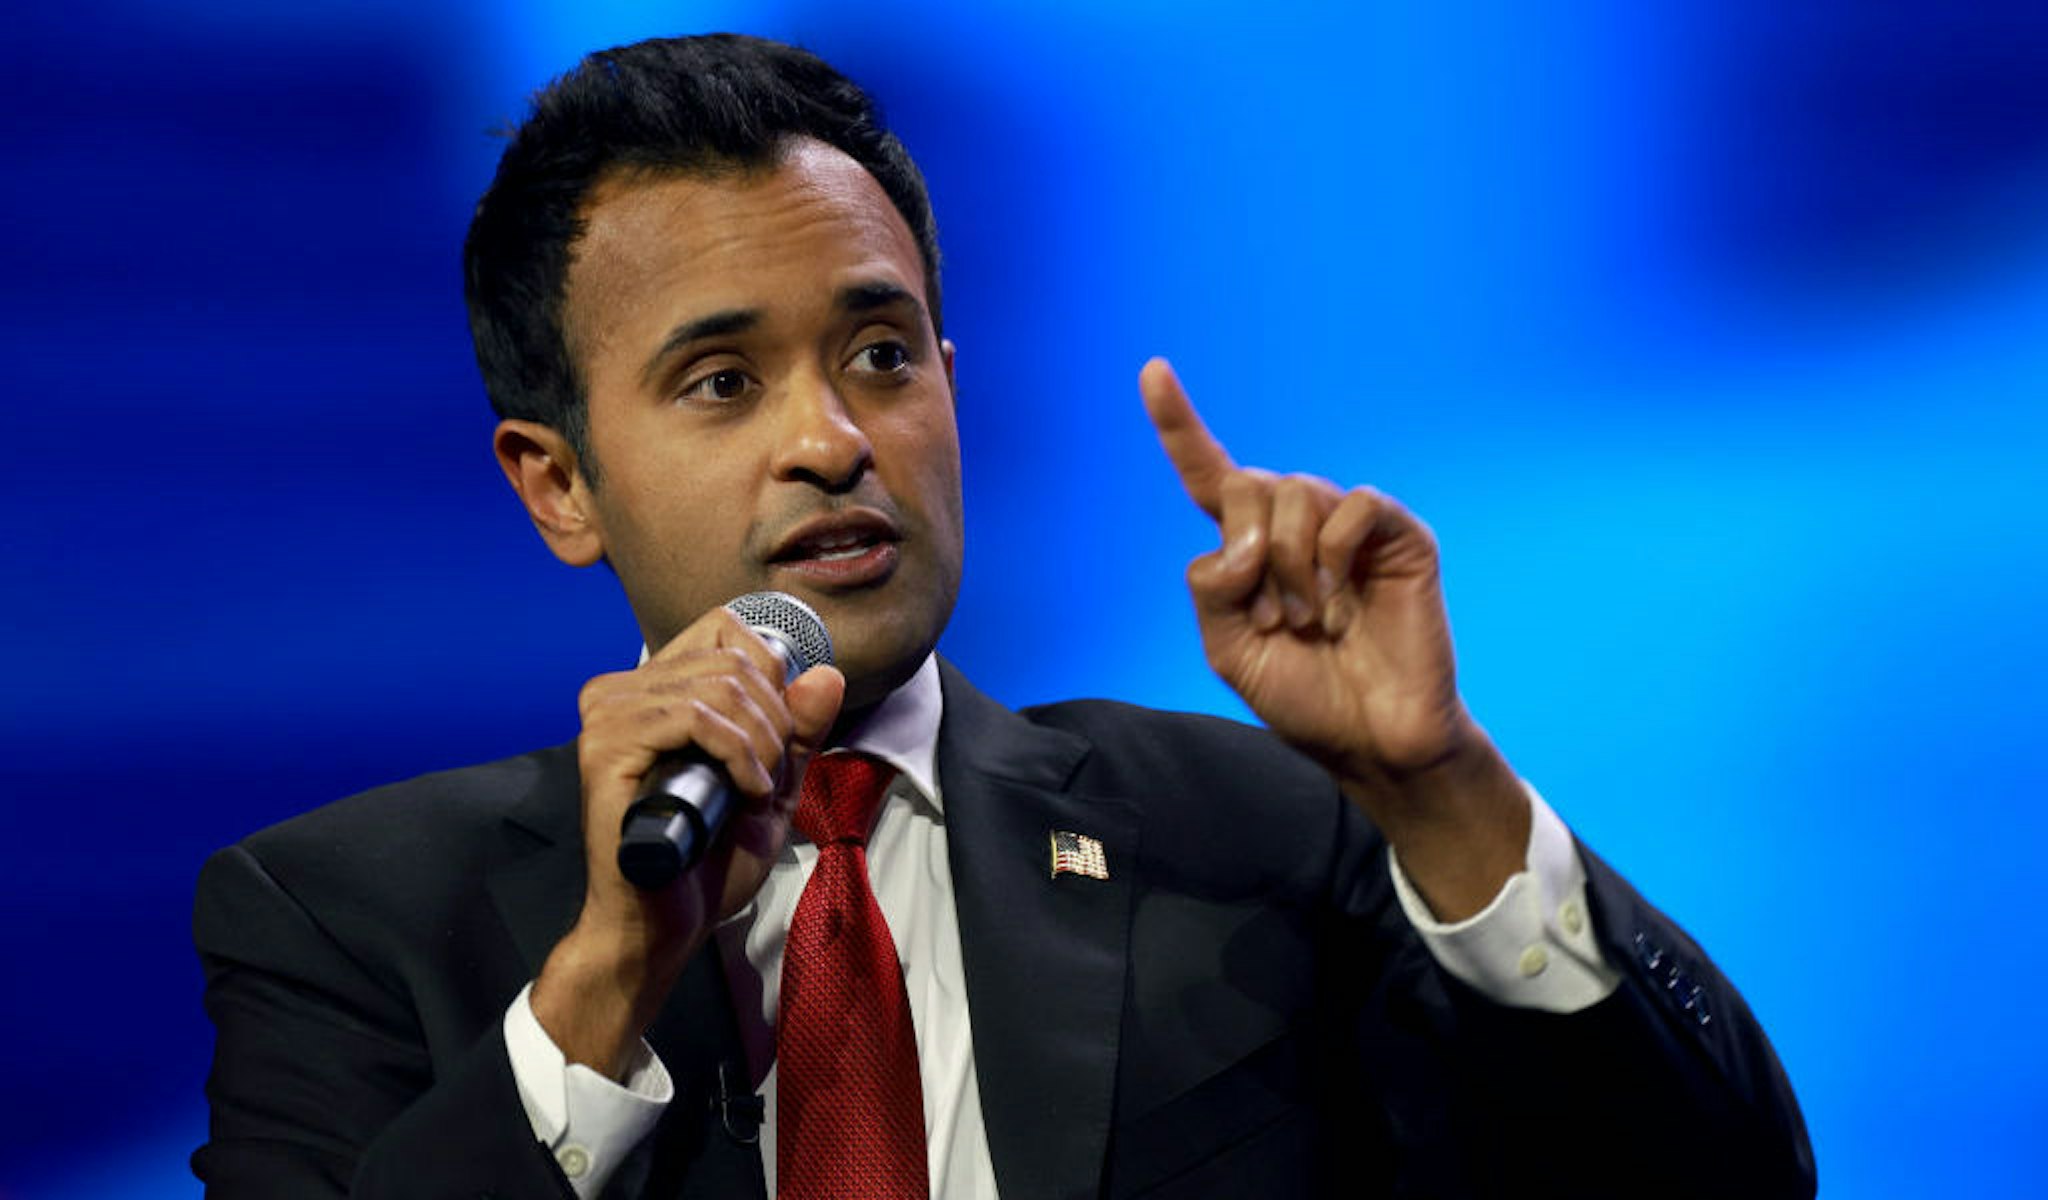 WEST PALM BEACH, FLORIDA - JULY 15: Vivek Ramaswamy speaks at the opening of the Turning Point Action conference on July 15, 2023 in West Palm Beach, Florida. Former President Donald Trump was scheduled to speak at the event held in the Palm Beach County Convention Center. (Photo by Joe Raedle/Getty Images)